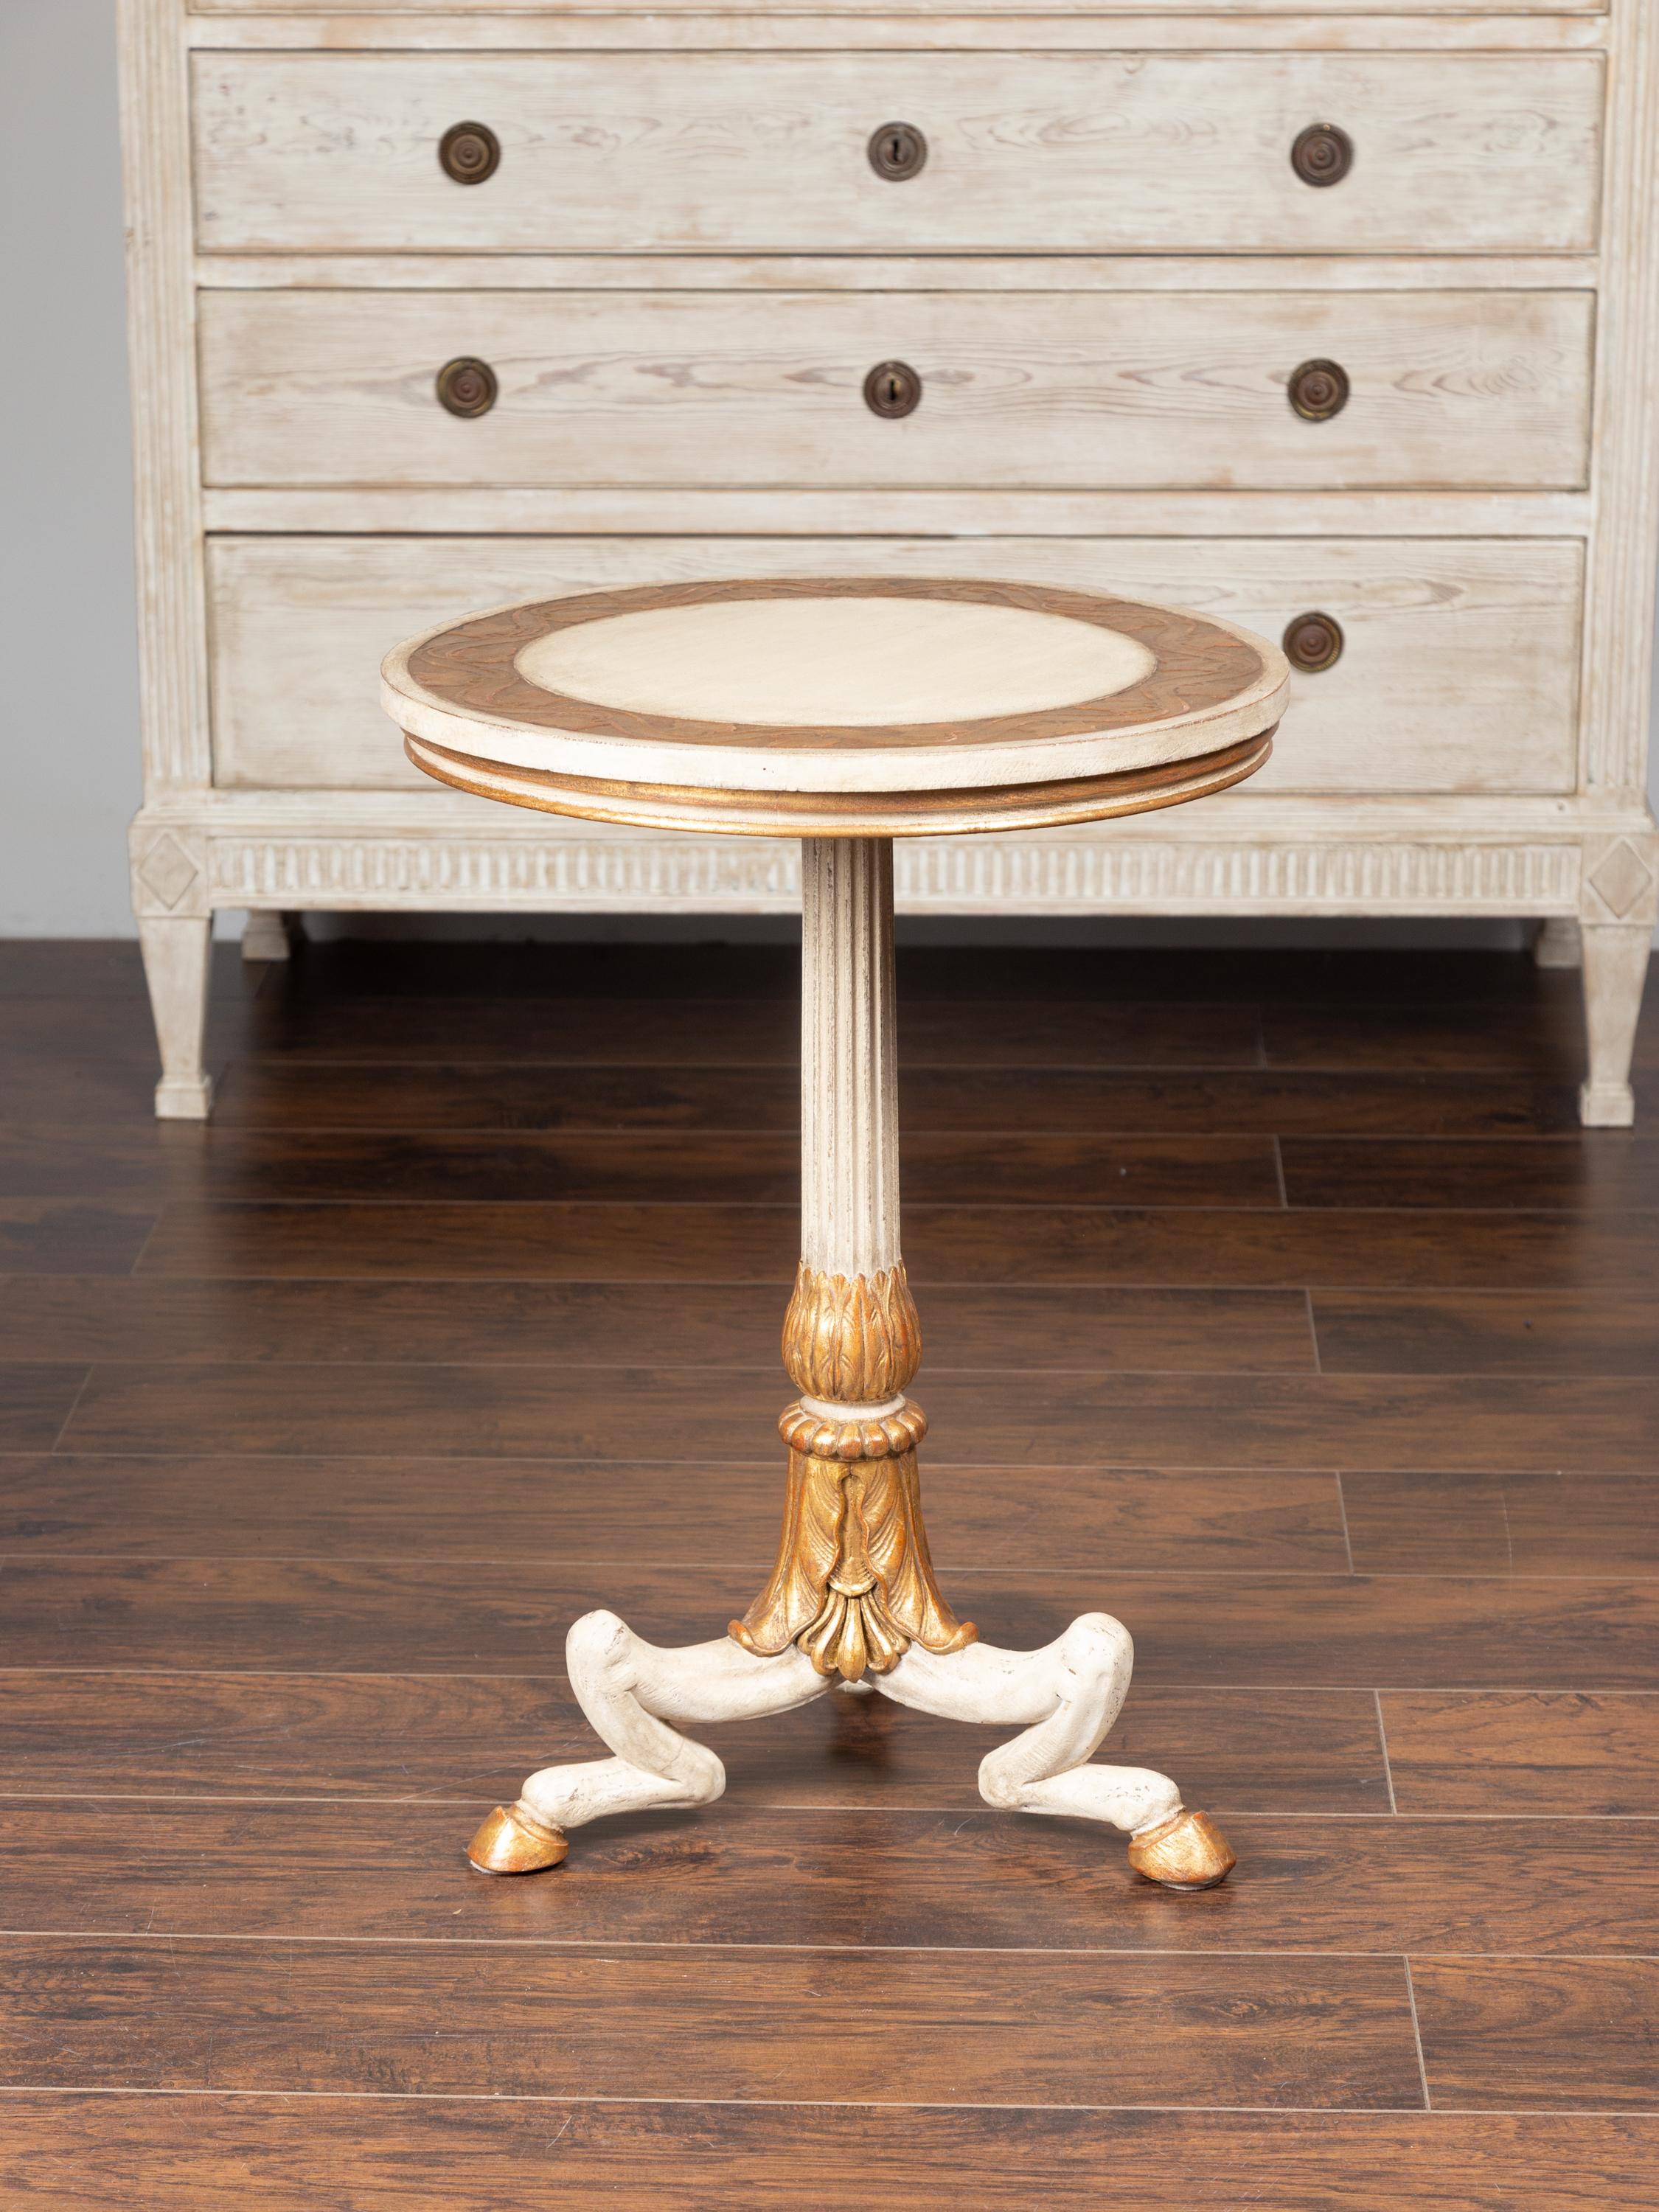 Italian 1930s Painted Wood Guéridon Table with Gilt Accents and Hoofed Feet For Sale 6